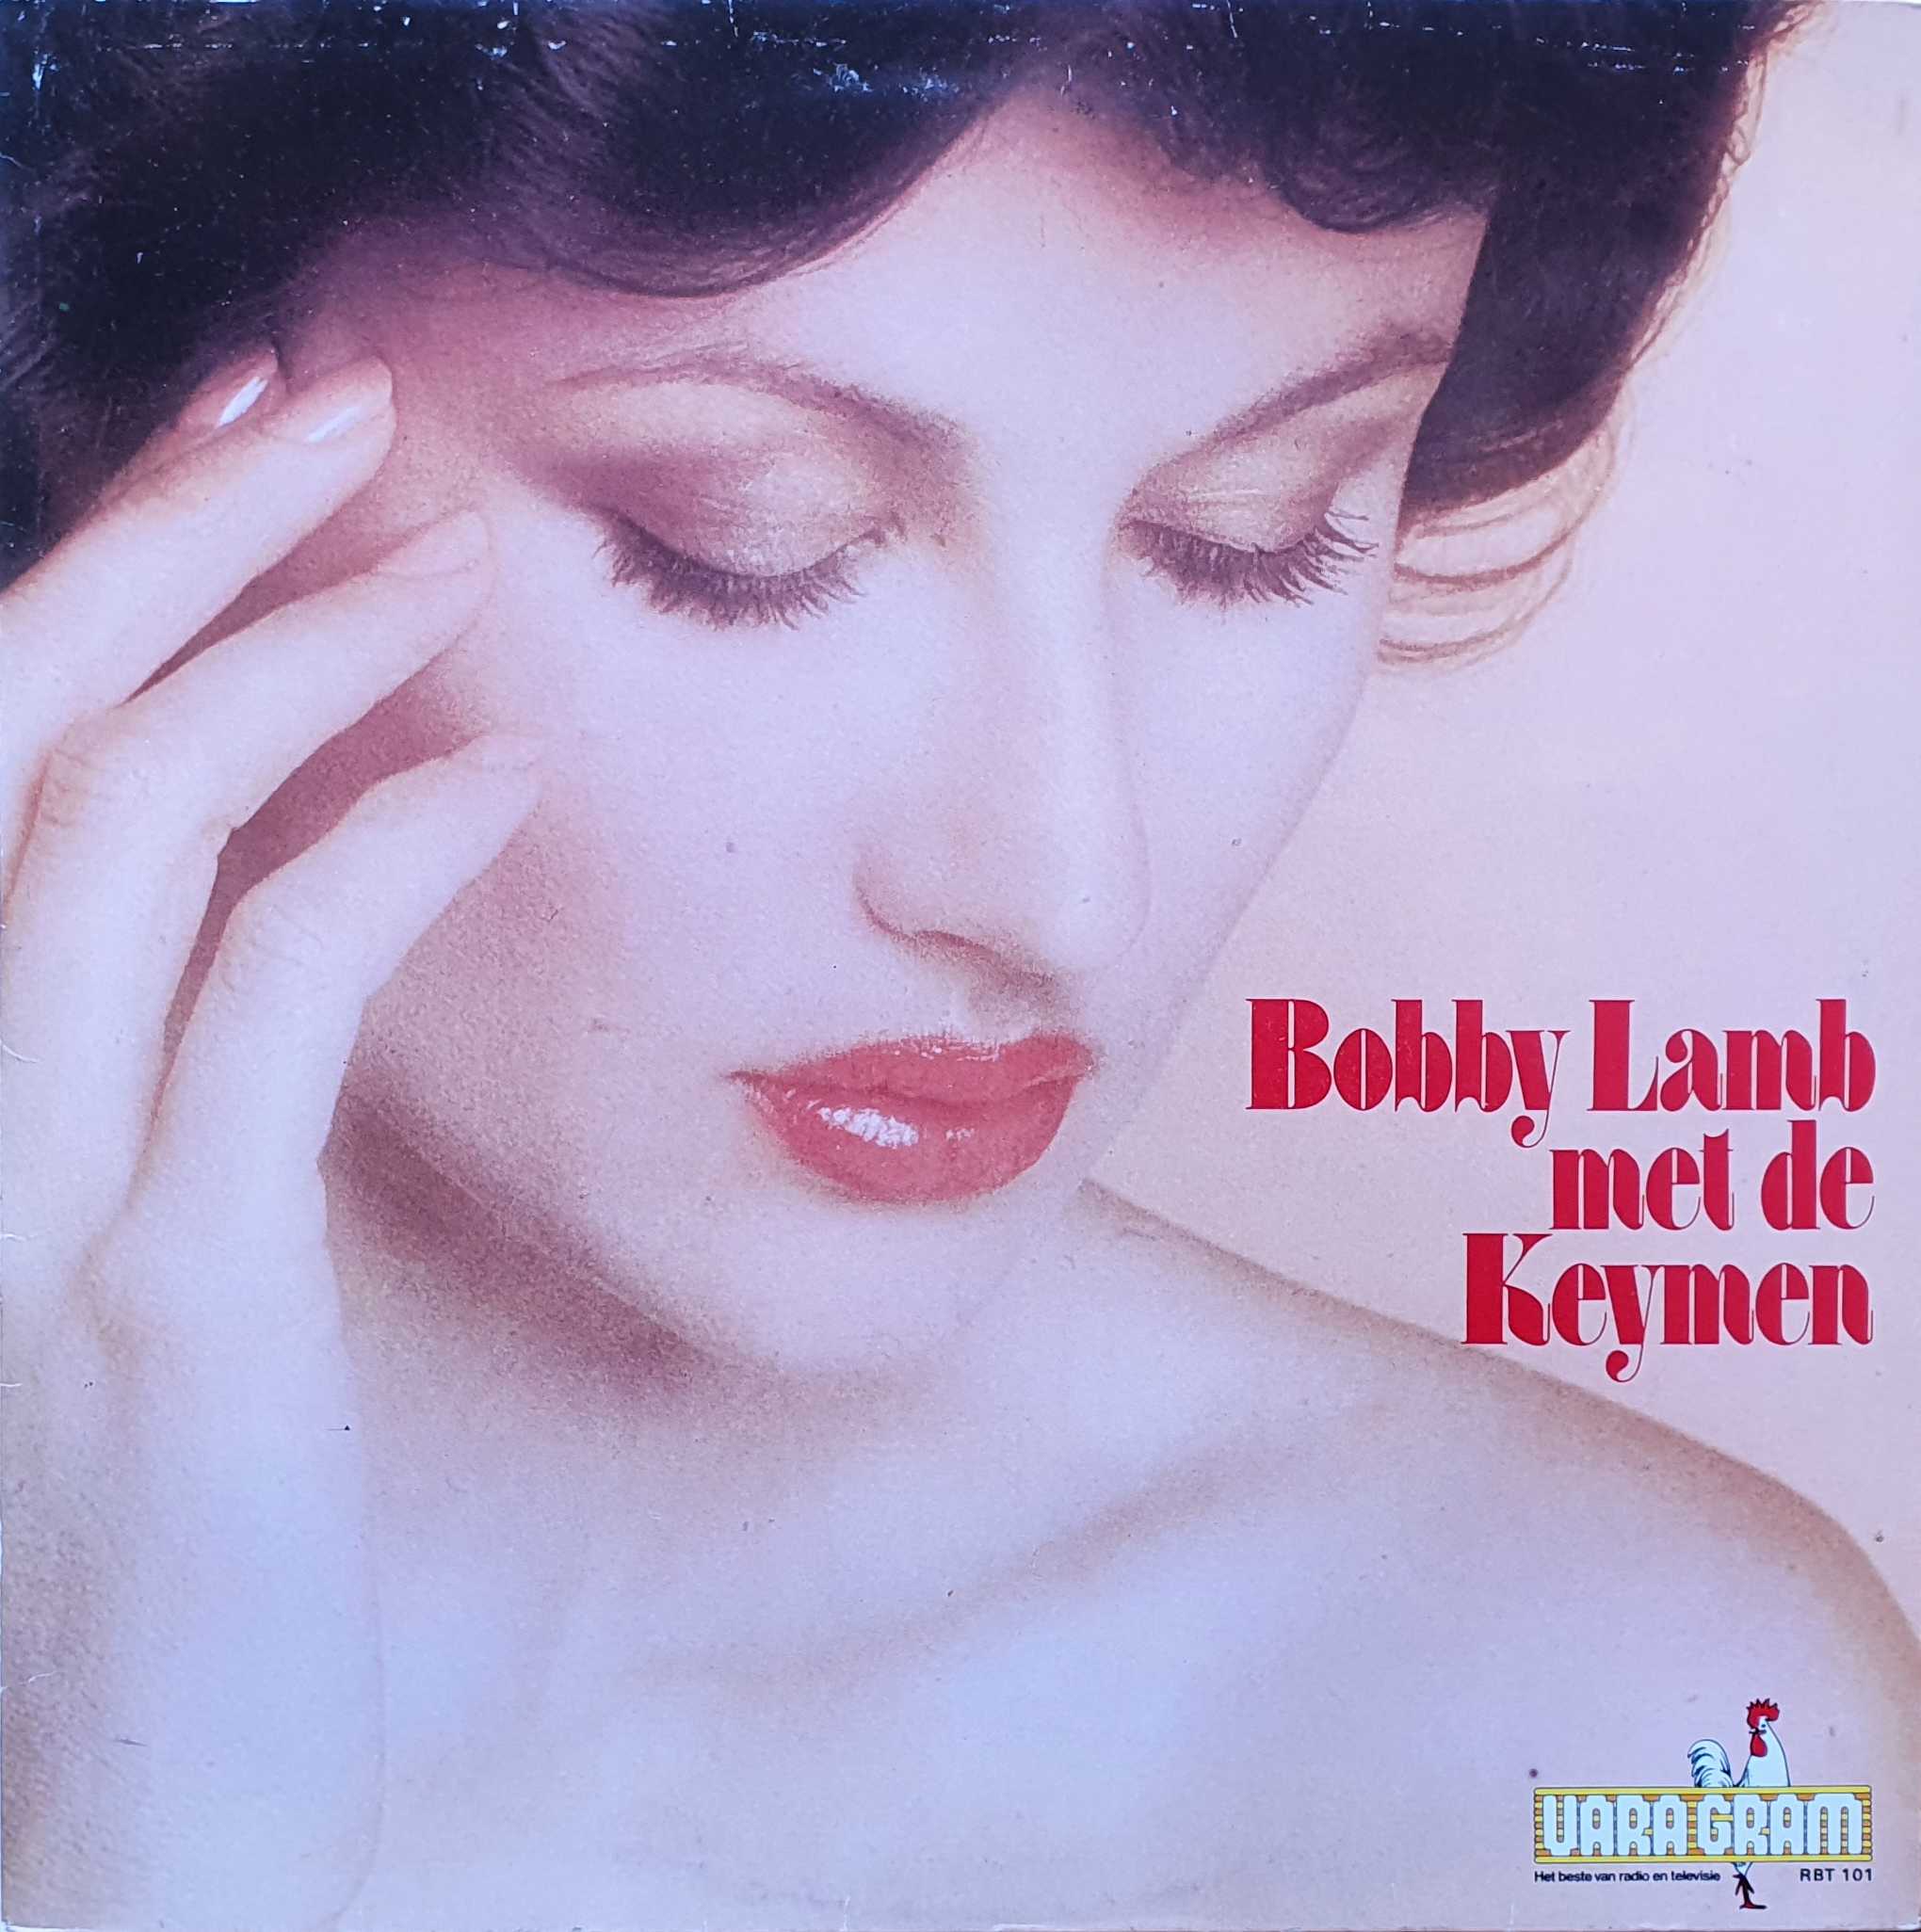 Picture of RBT 101-iD Bobby, Lamb met de Keymen by artist Various from the BBC albums - Records and Tapes library